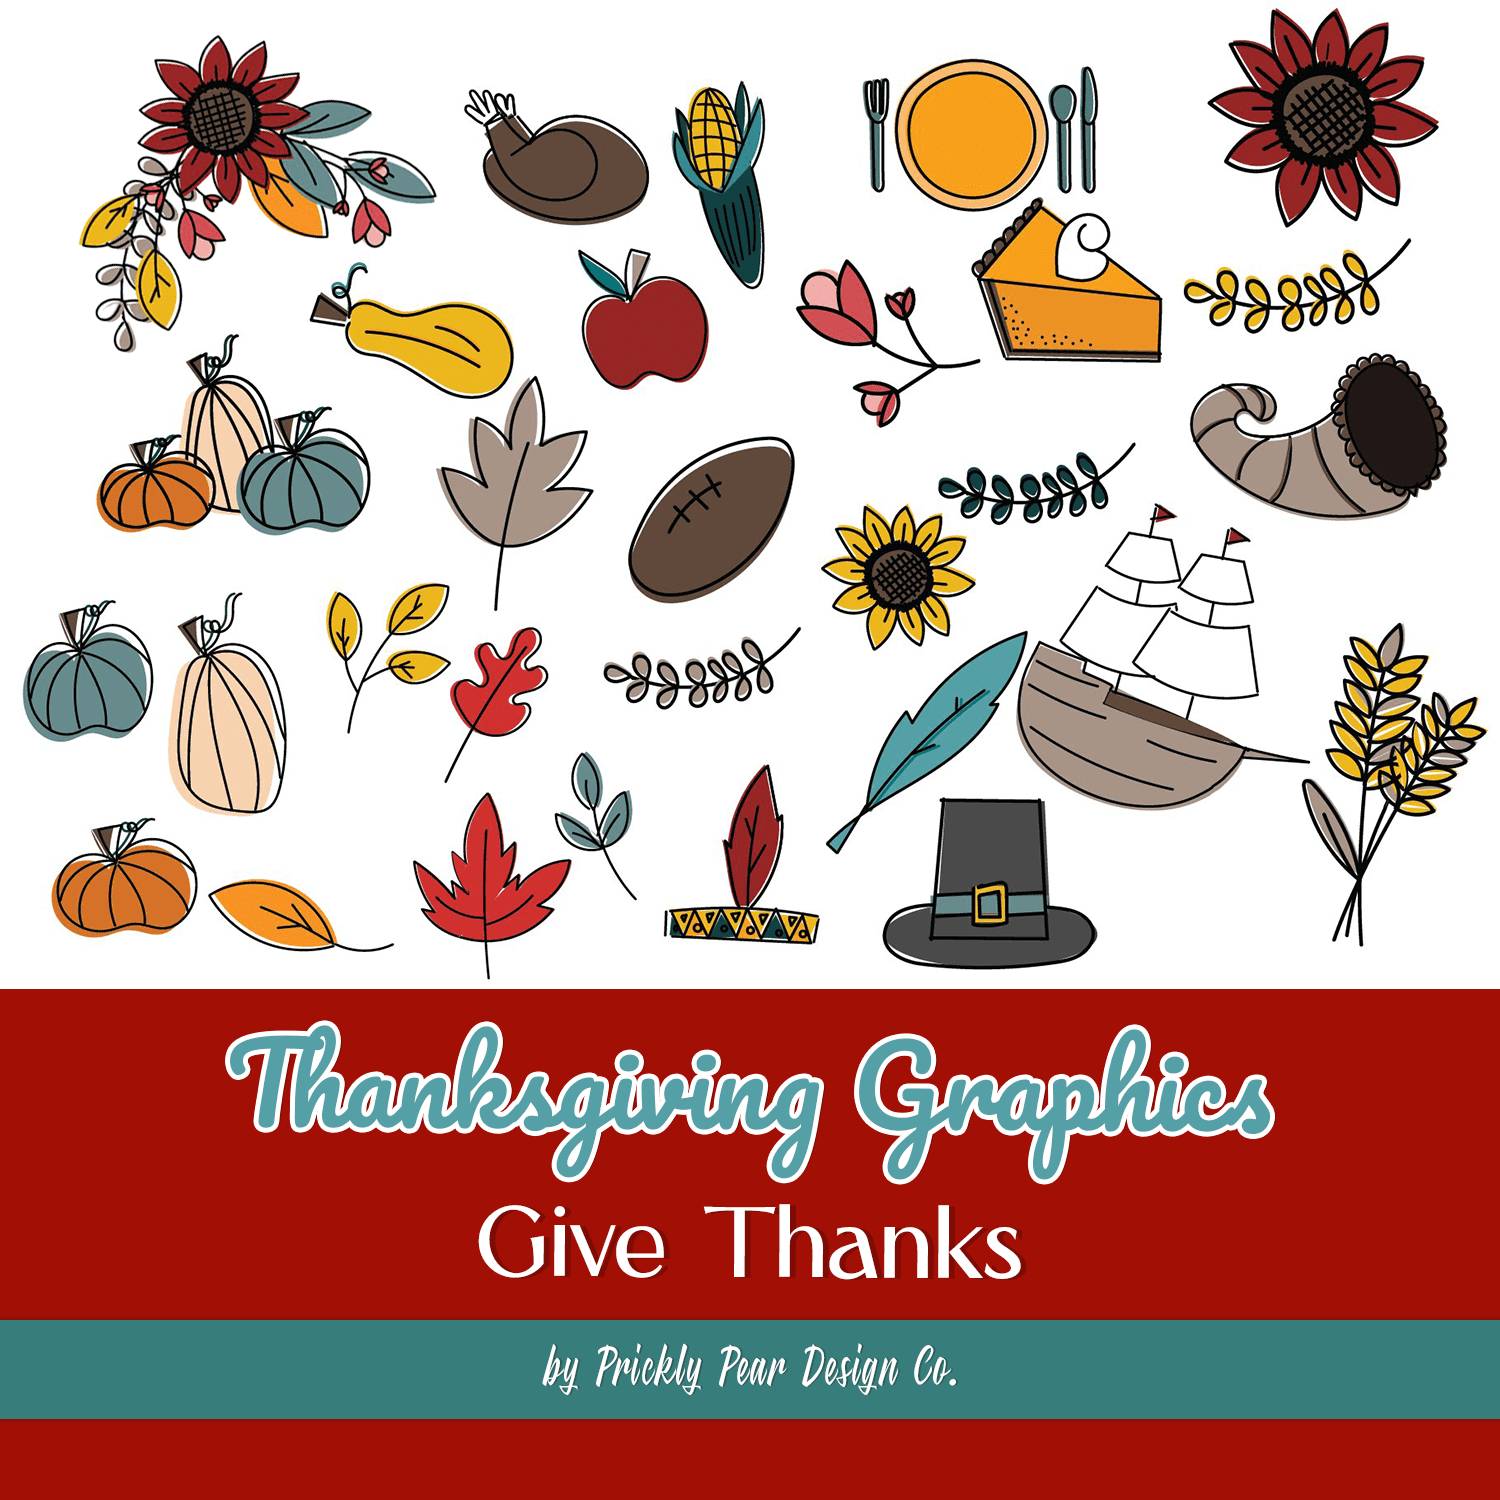 Thanksgiving Graphics - Give Thanks.